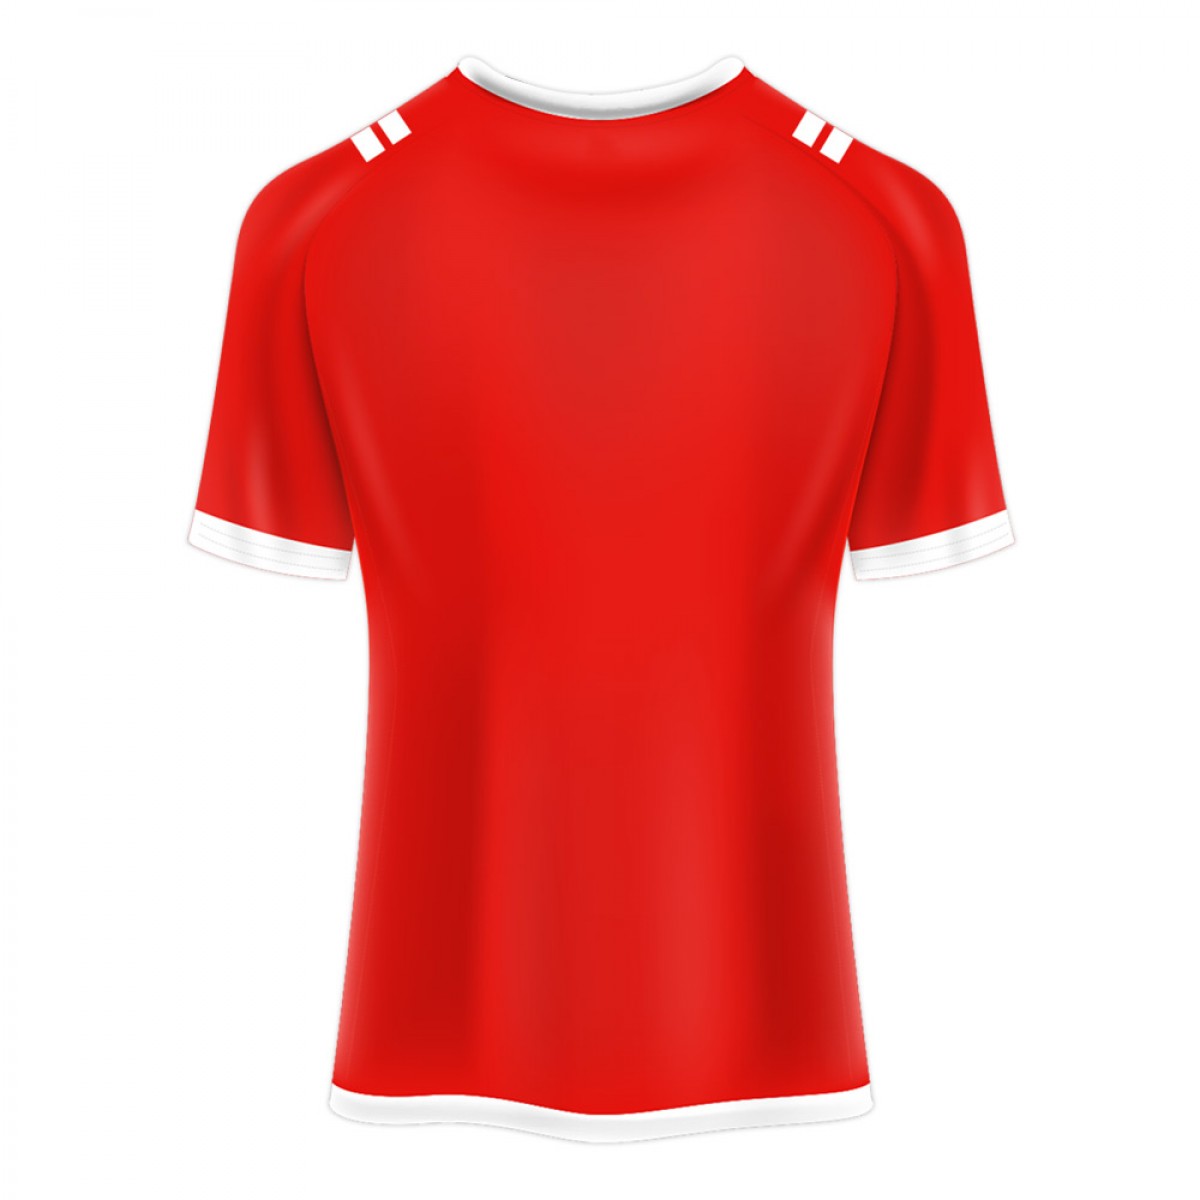 official-player-national-football-home-jersey-5102-3